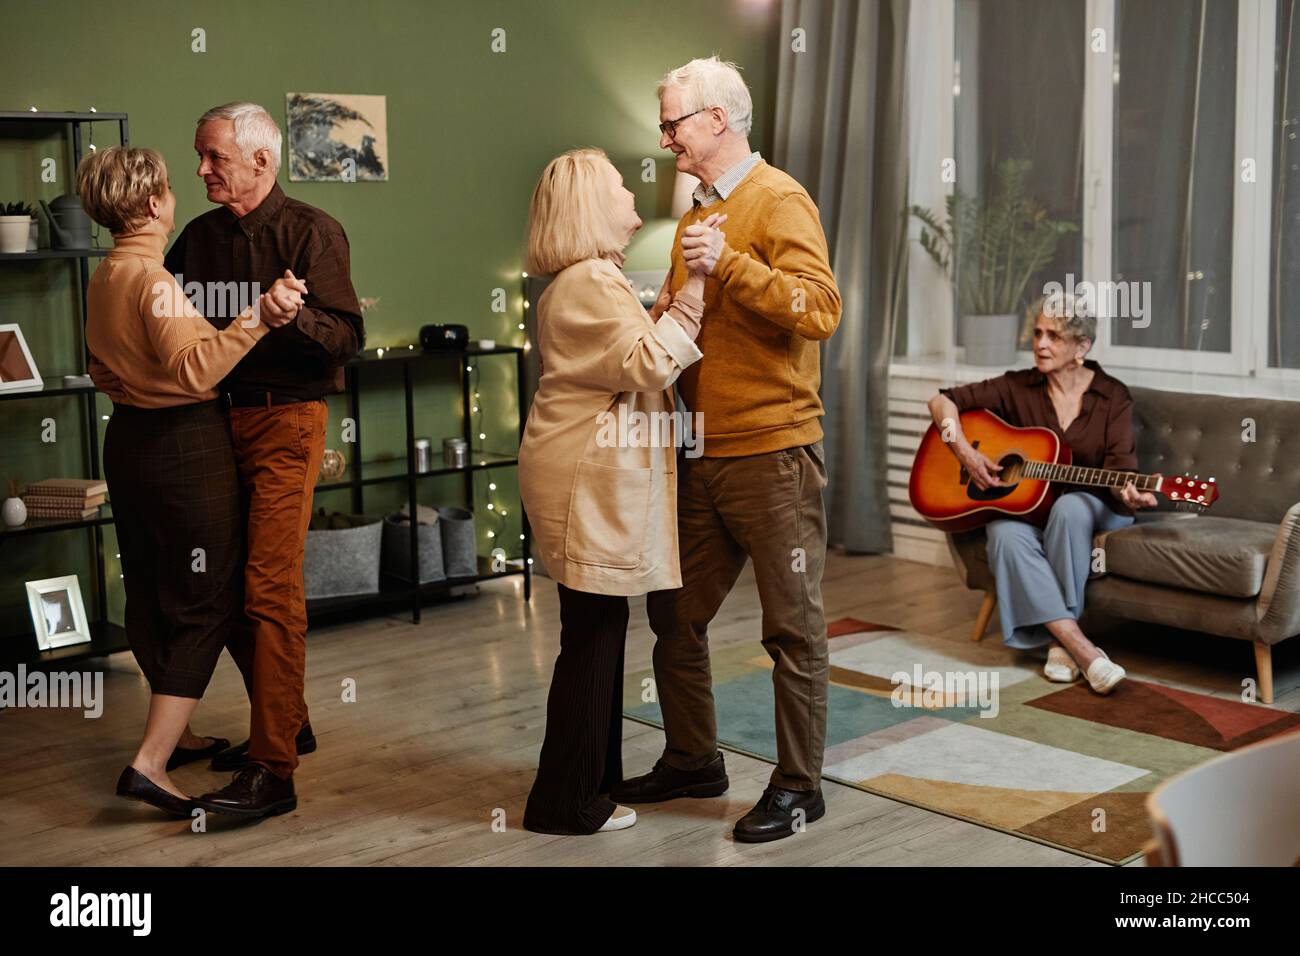 Two Caucasian senior couples dancing in decorated with lights living room while aged woman sitting on couch and playing acoustic guitar Stock Photo